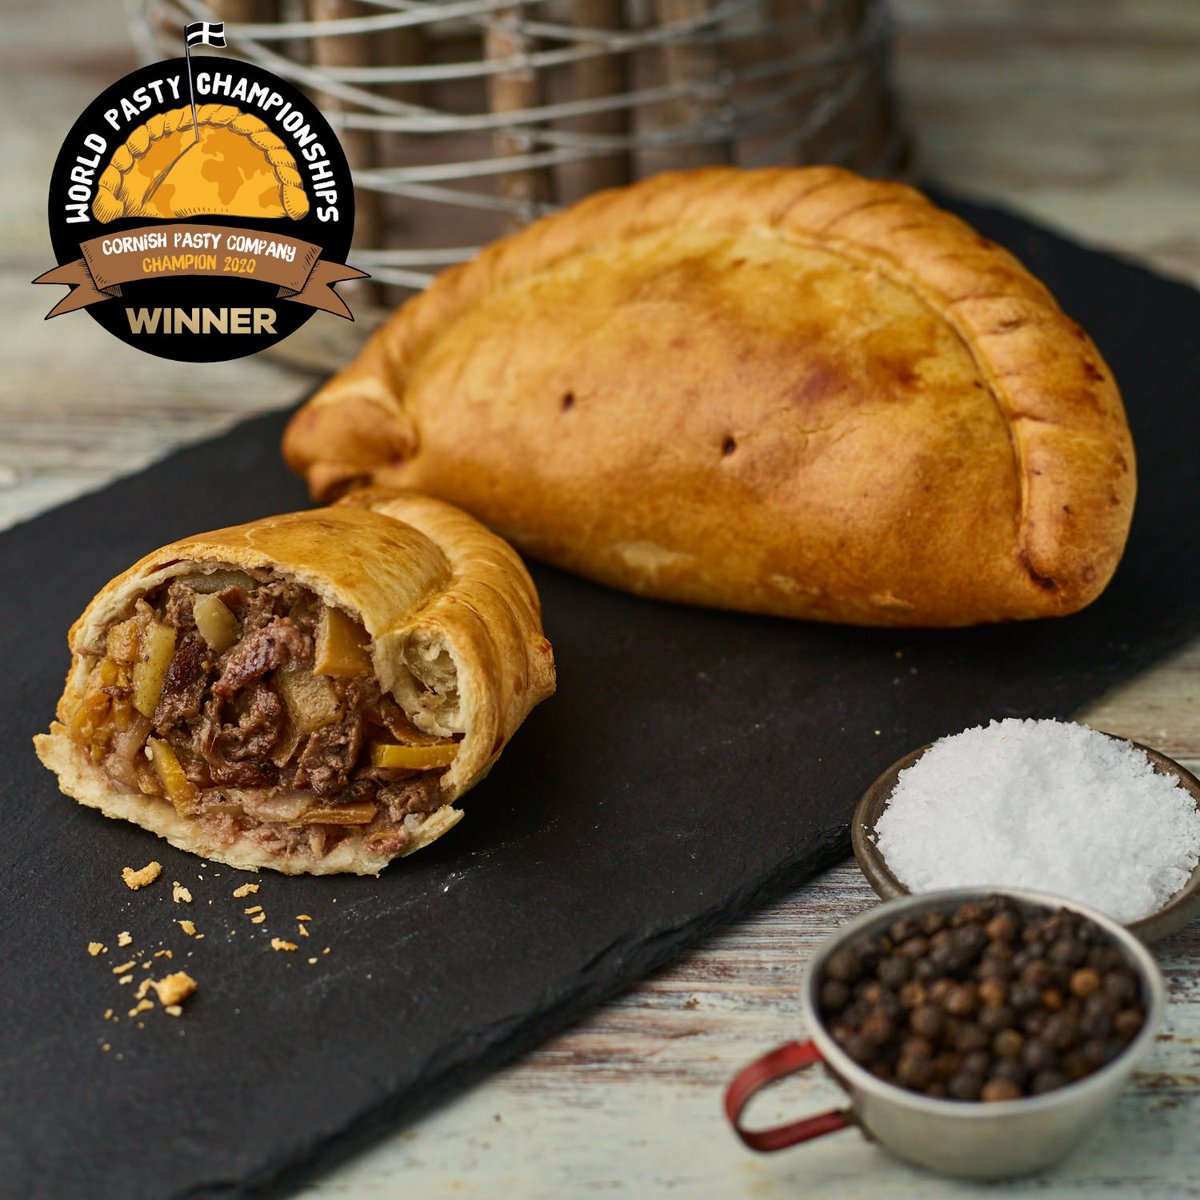 Cornish Pasty Week we are offering 10% OFF 10 Traditional Cornish Pasties - code : pastyweek10 Pop over to phatathome.com to order. We are also donating 5p per pasty to #devonandcornwallfoodaction throughout the week... Cornish Pasty Week from 27th Feb -March 5th.